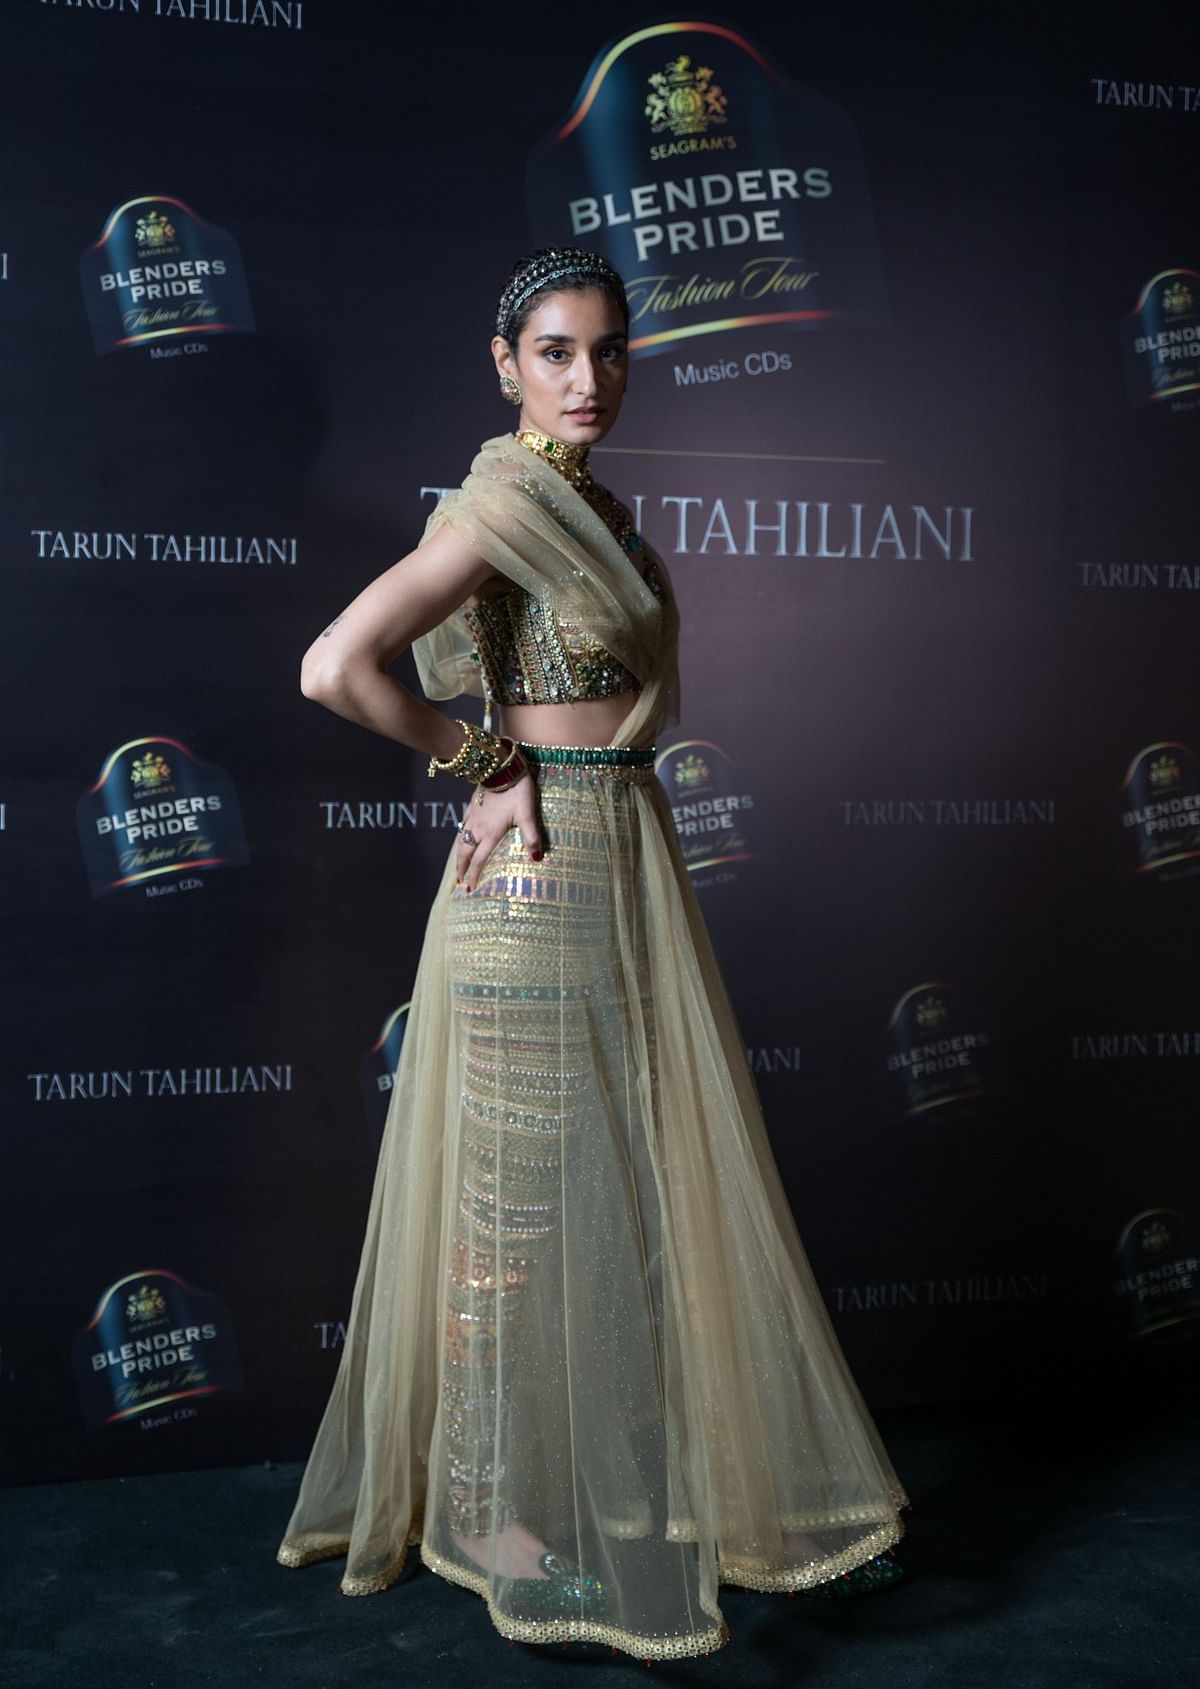 Tarun Tahiliani celebrated 25 years in the world of fashion with a one-of-its-kind digital show.